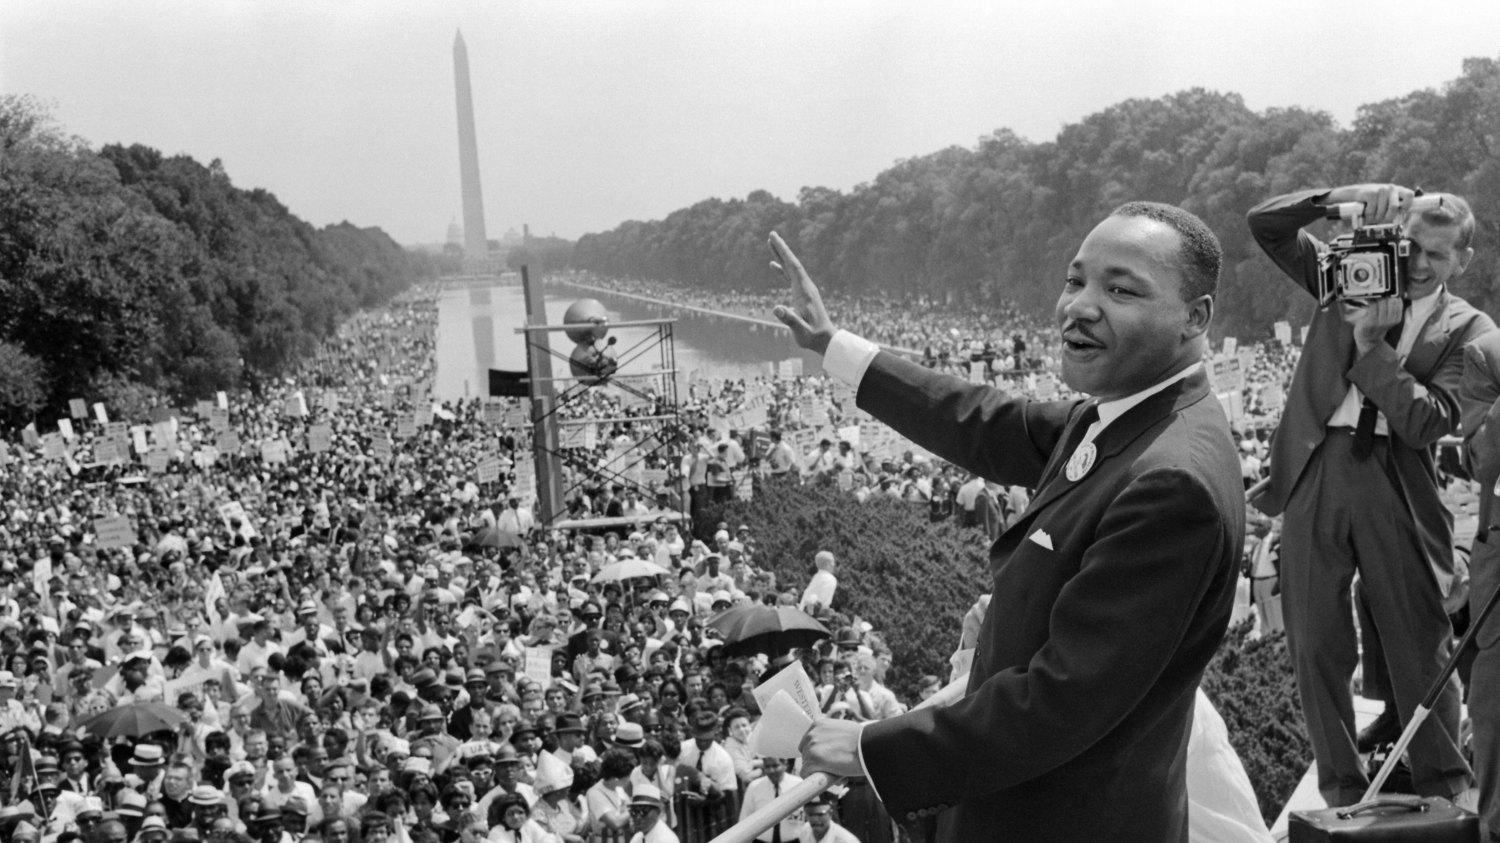 Photo of Dr. Martin Luther King Jr. during his "I have a dream" speech in Washington, D.C.